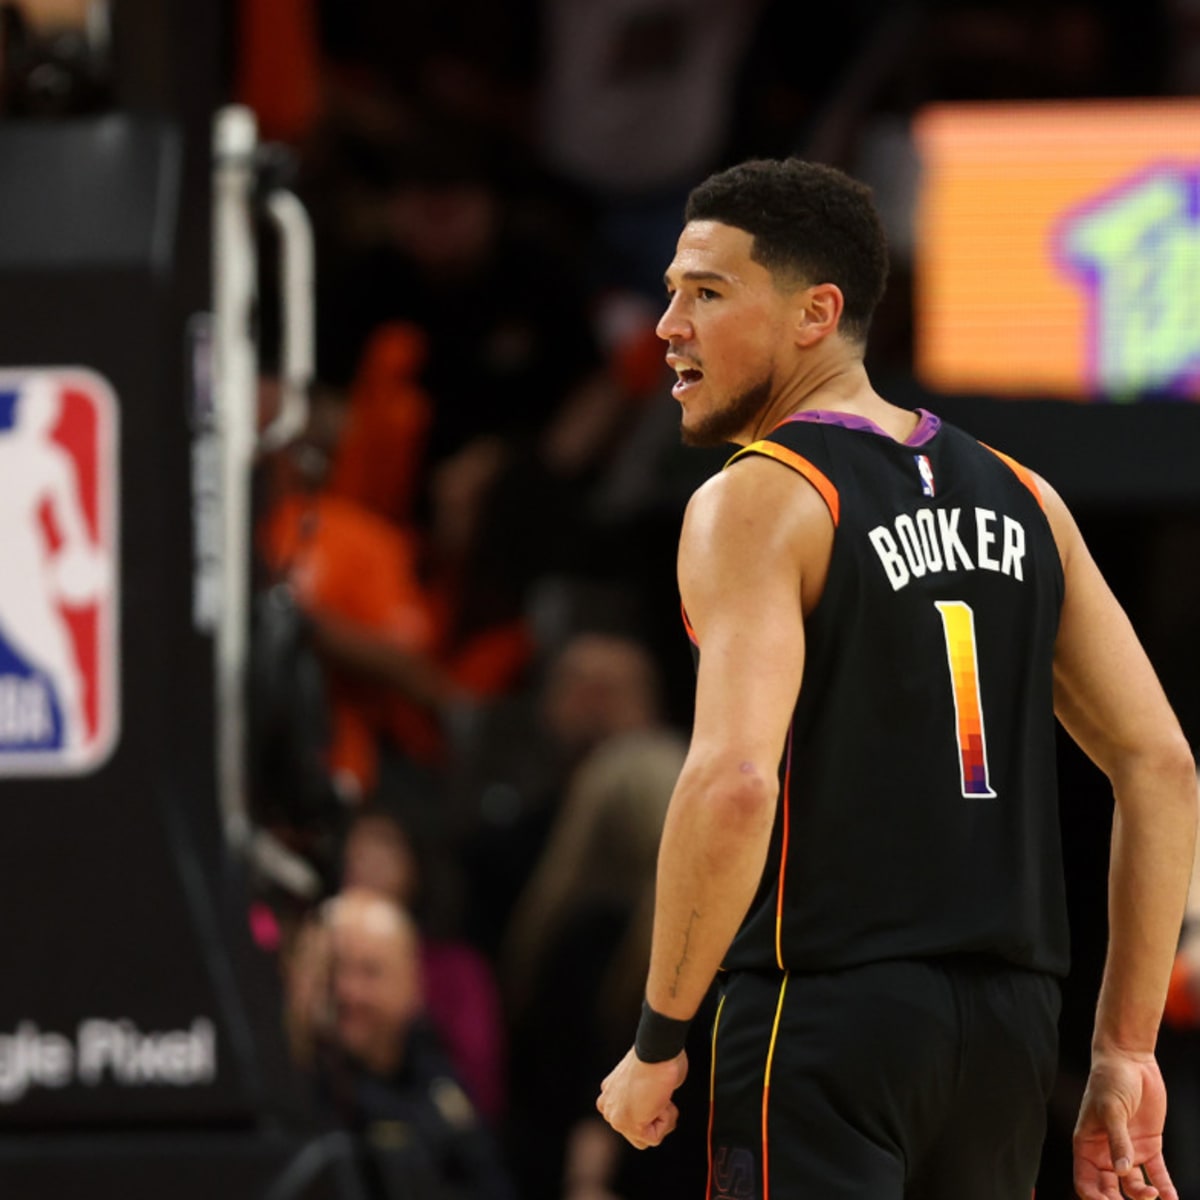 Devin Booker's 45-point performance ties Charles Barkley for most